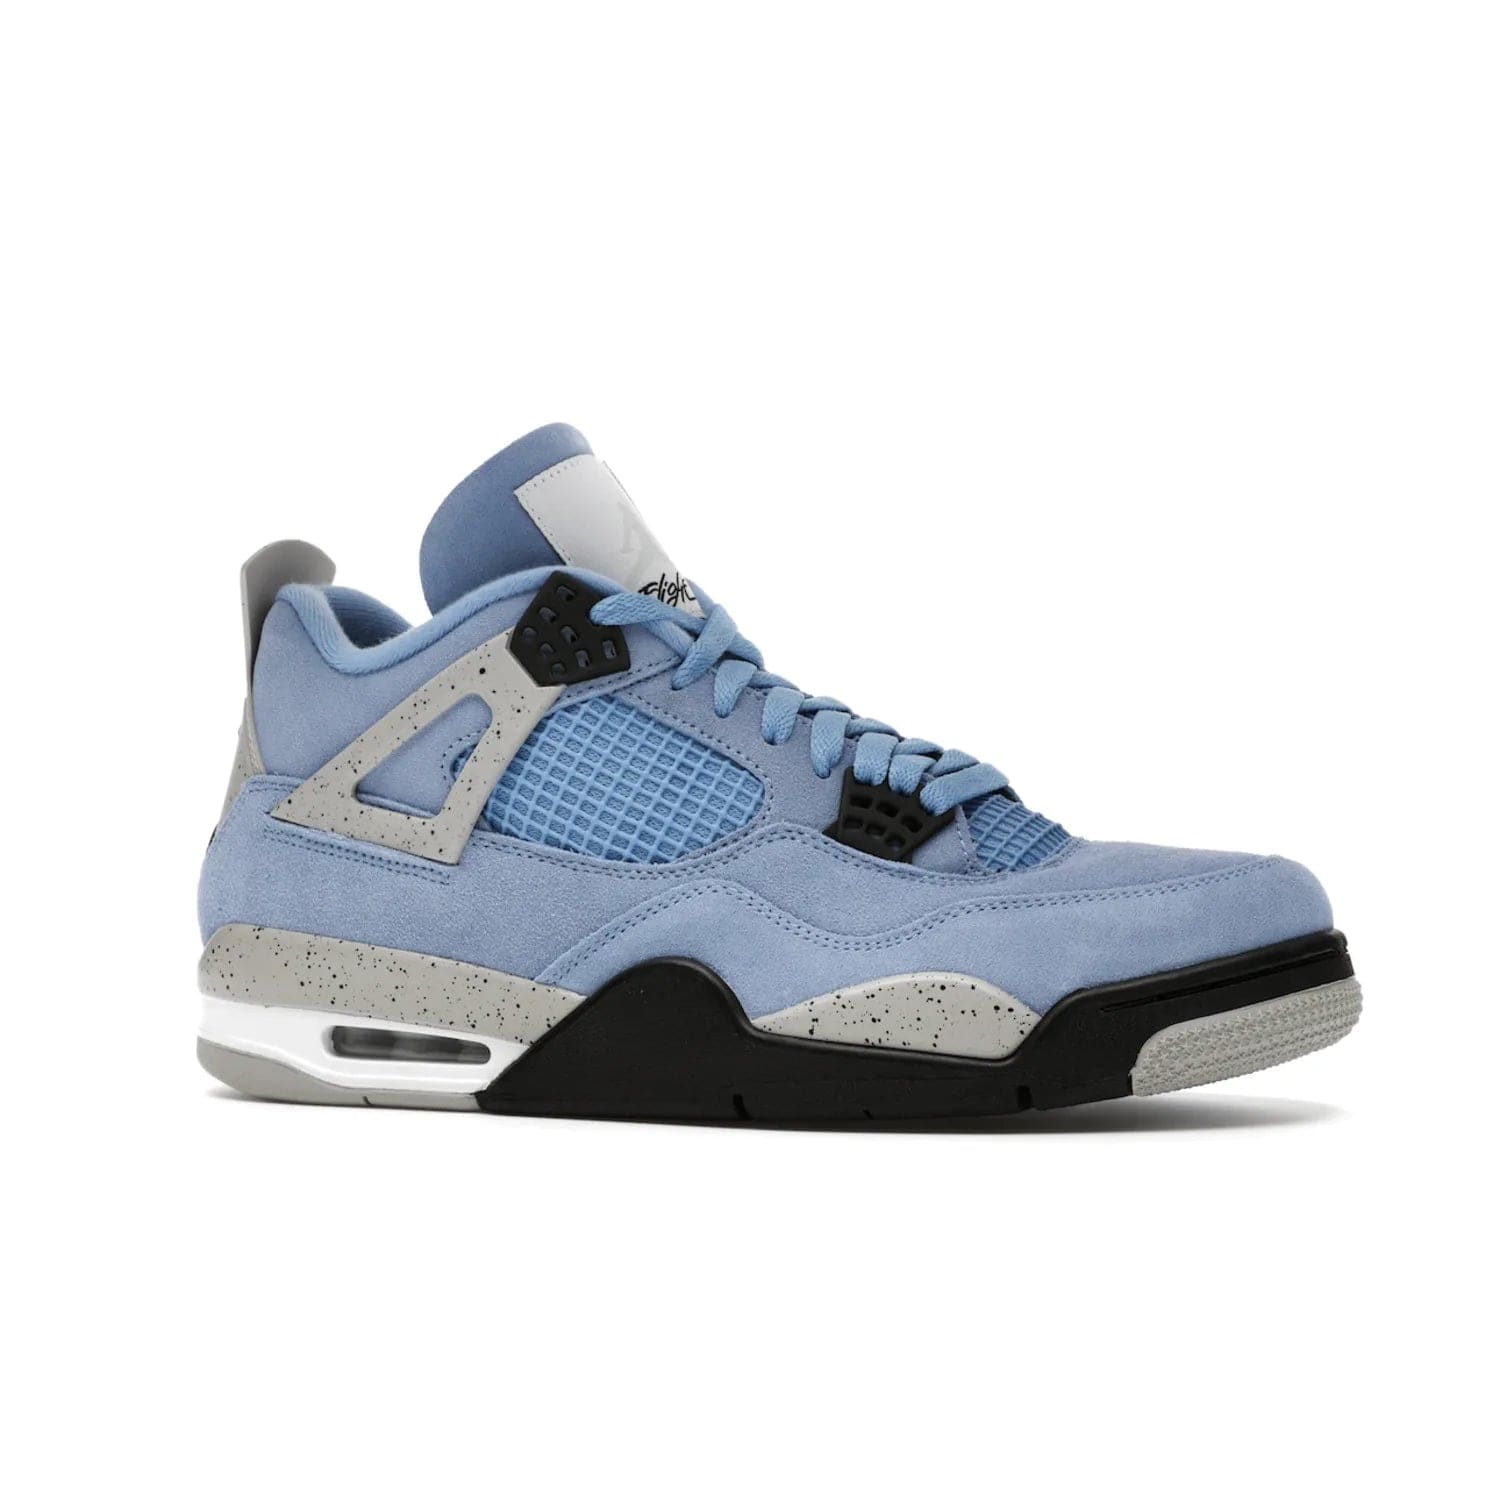 Jordan 4 Retro University Blue - Image 3 - Only at www.BallersClubKickz.com - The Air Jordan 4 University Blue honors MJ's alma mater. Rich University Blue suede, panels of netting, and Cement Grey speckled eyelets give this design an edgy look. Features a black, white and Tech Grey sole with a clear Air unit and two woven labels on the tongue. Jumpman logo & Team Jordan jock tag included. Released April 2021.